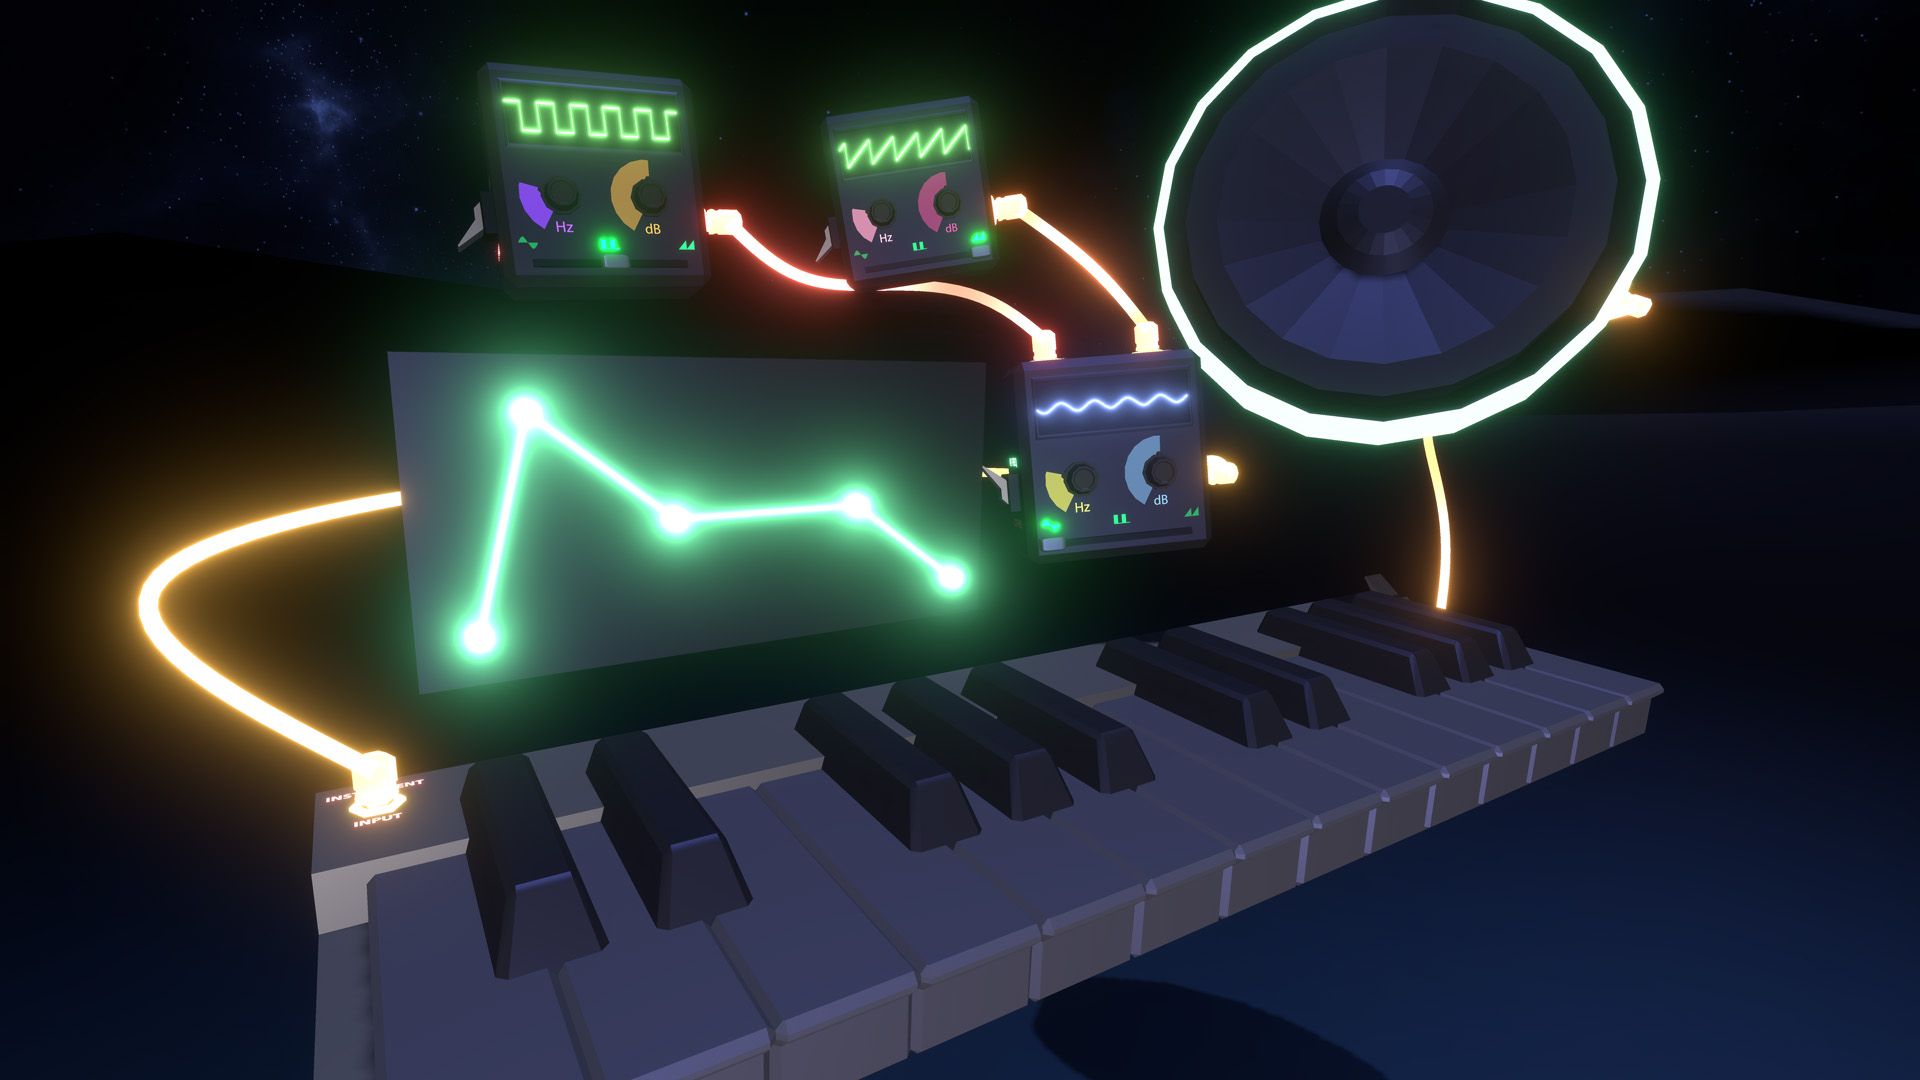 SoundStage for Steam Is A Virtual Reality Music Studio Experience